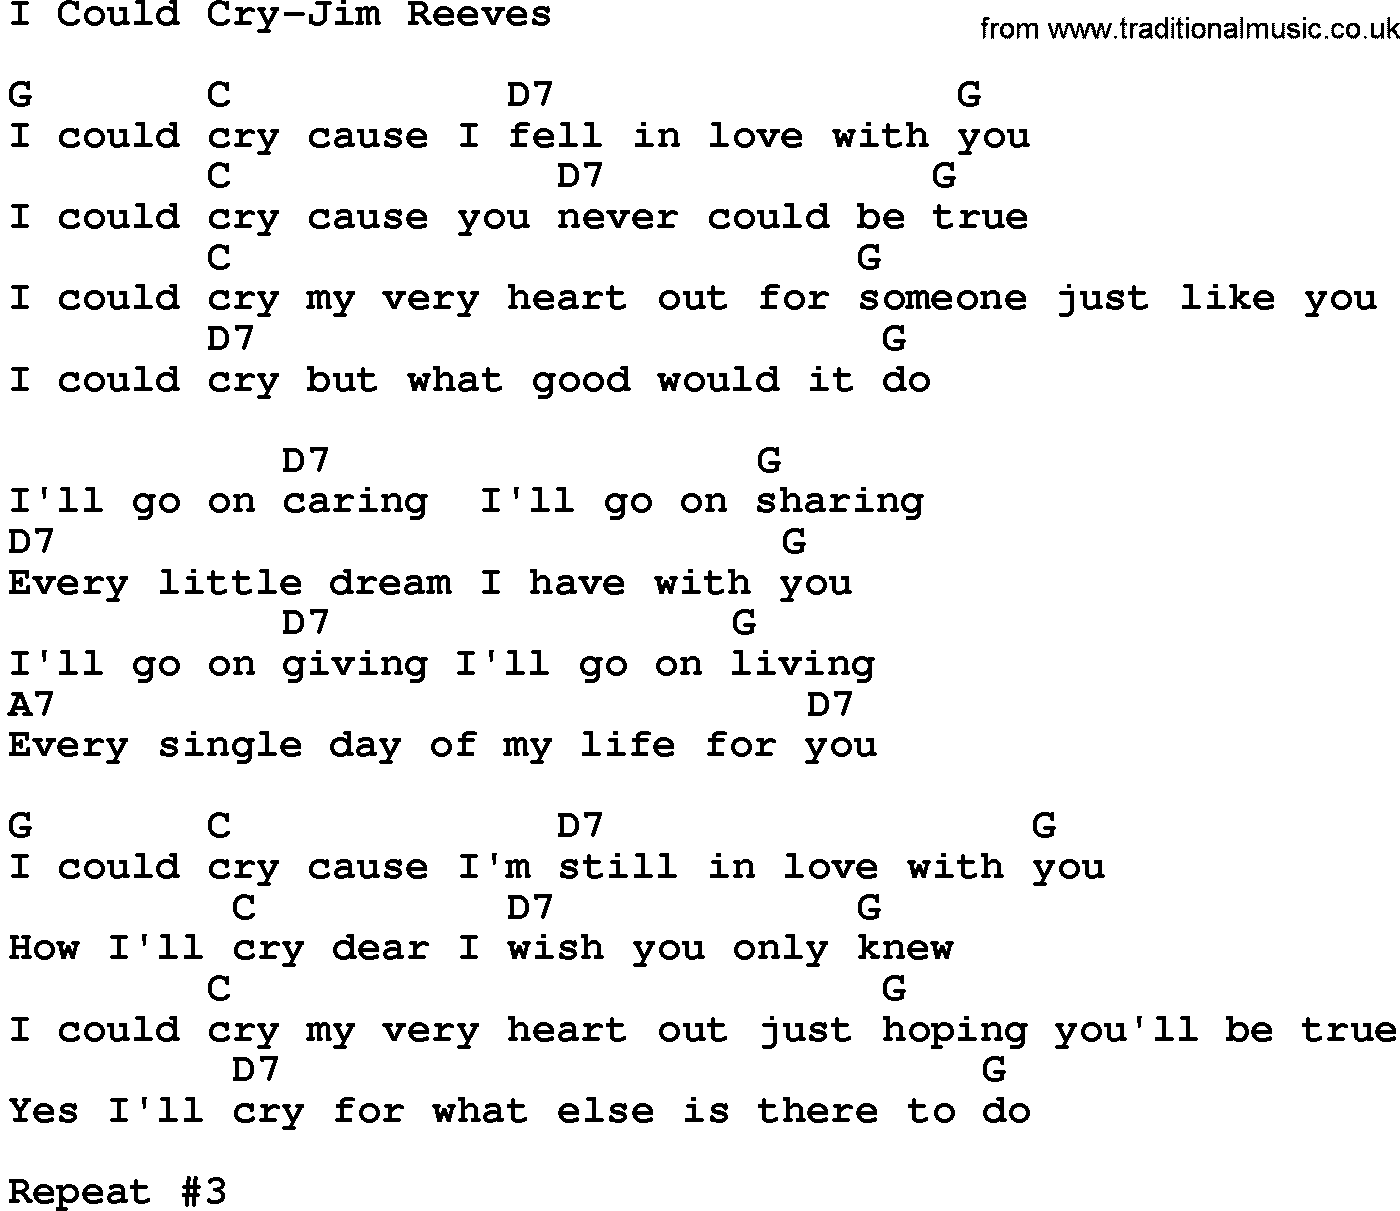 Country music song: I Could Cry-Jim Reeves lyrics and chords